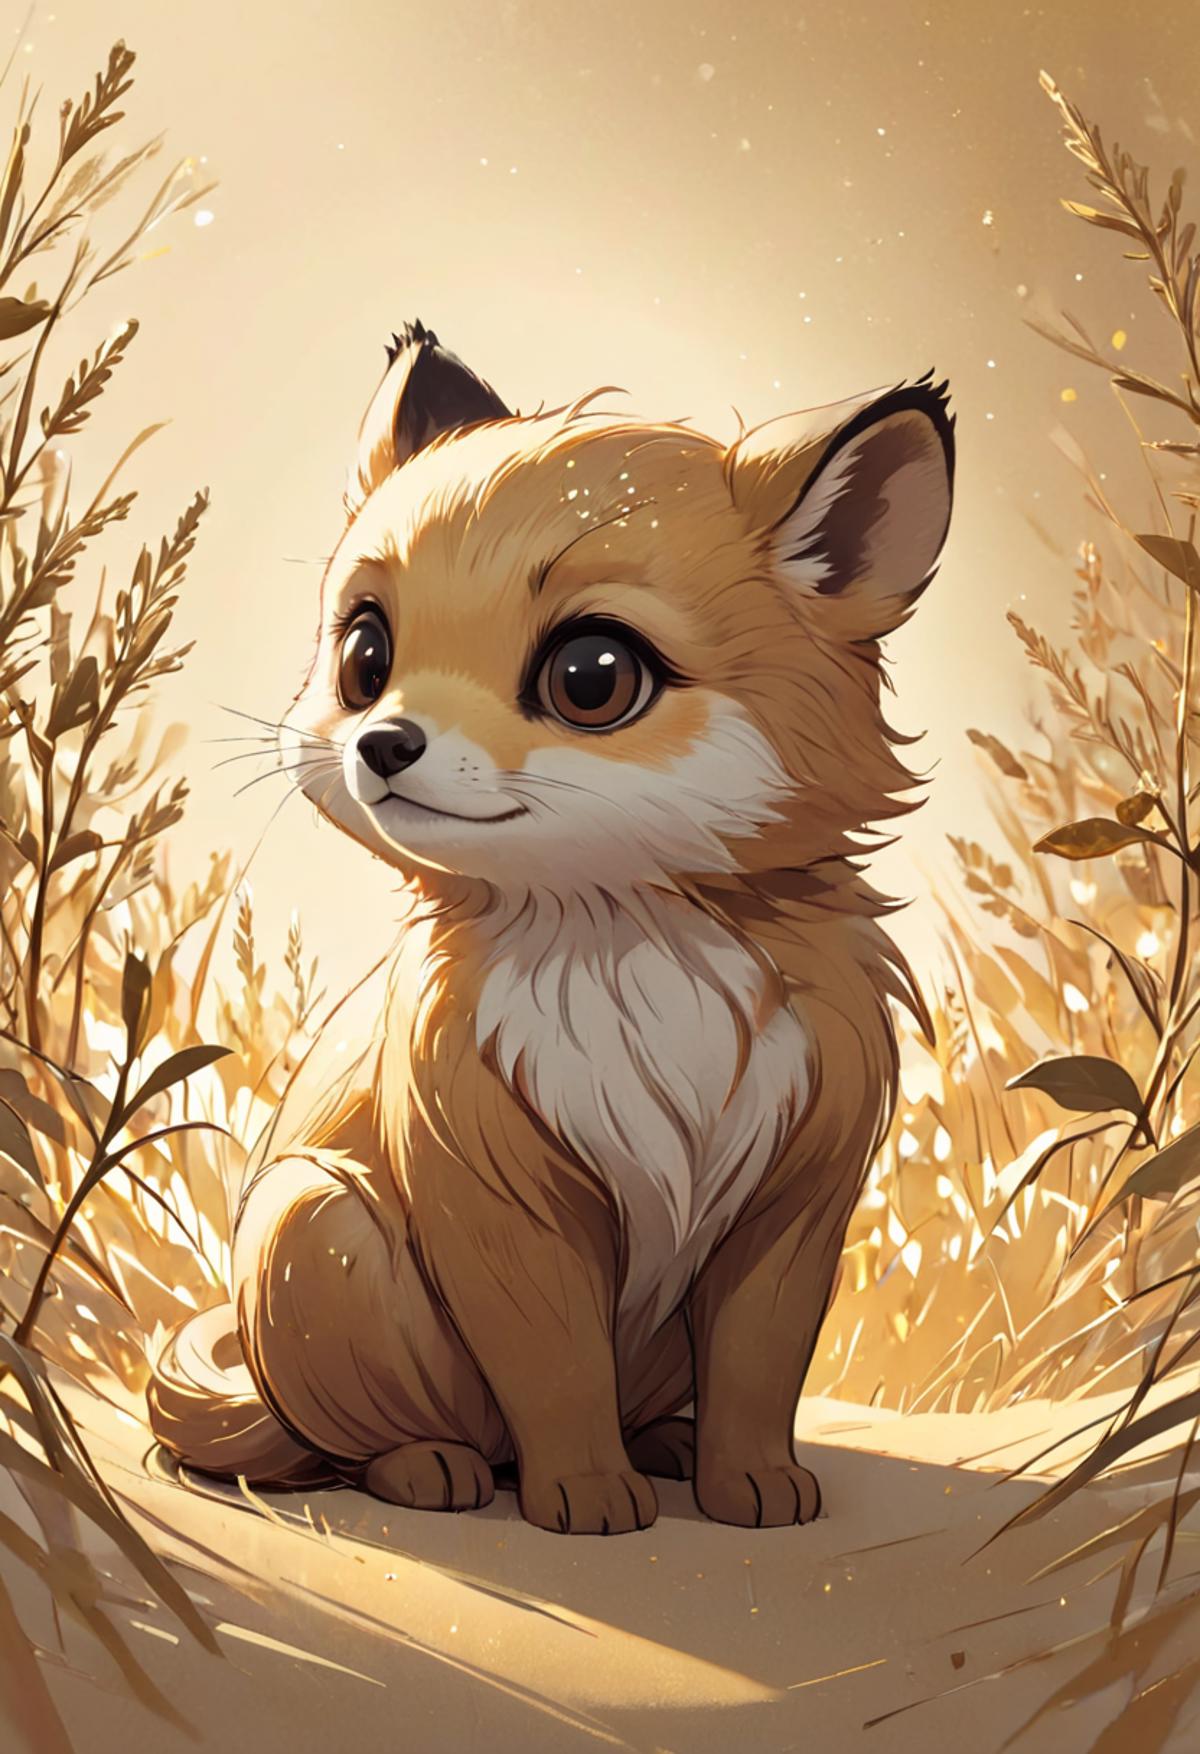 A Cartoon Illustration of a Cute Fox Sitting in the Grass